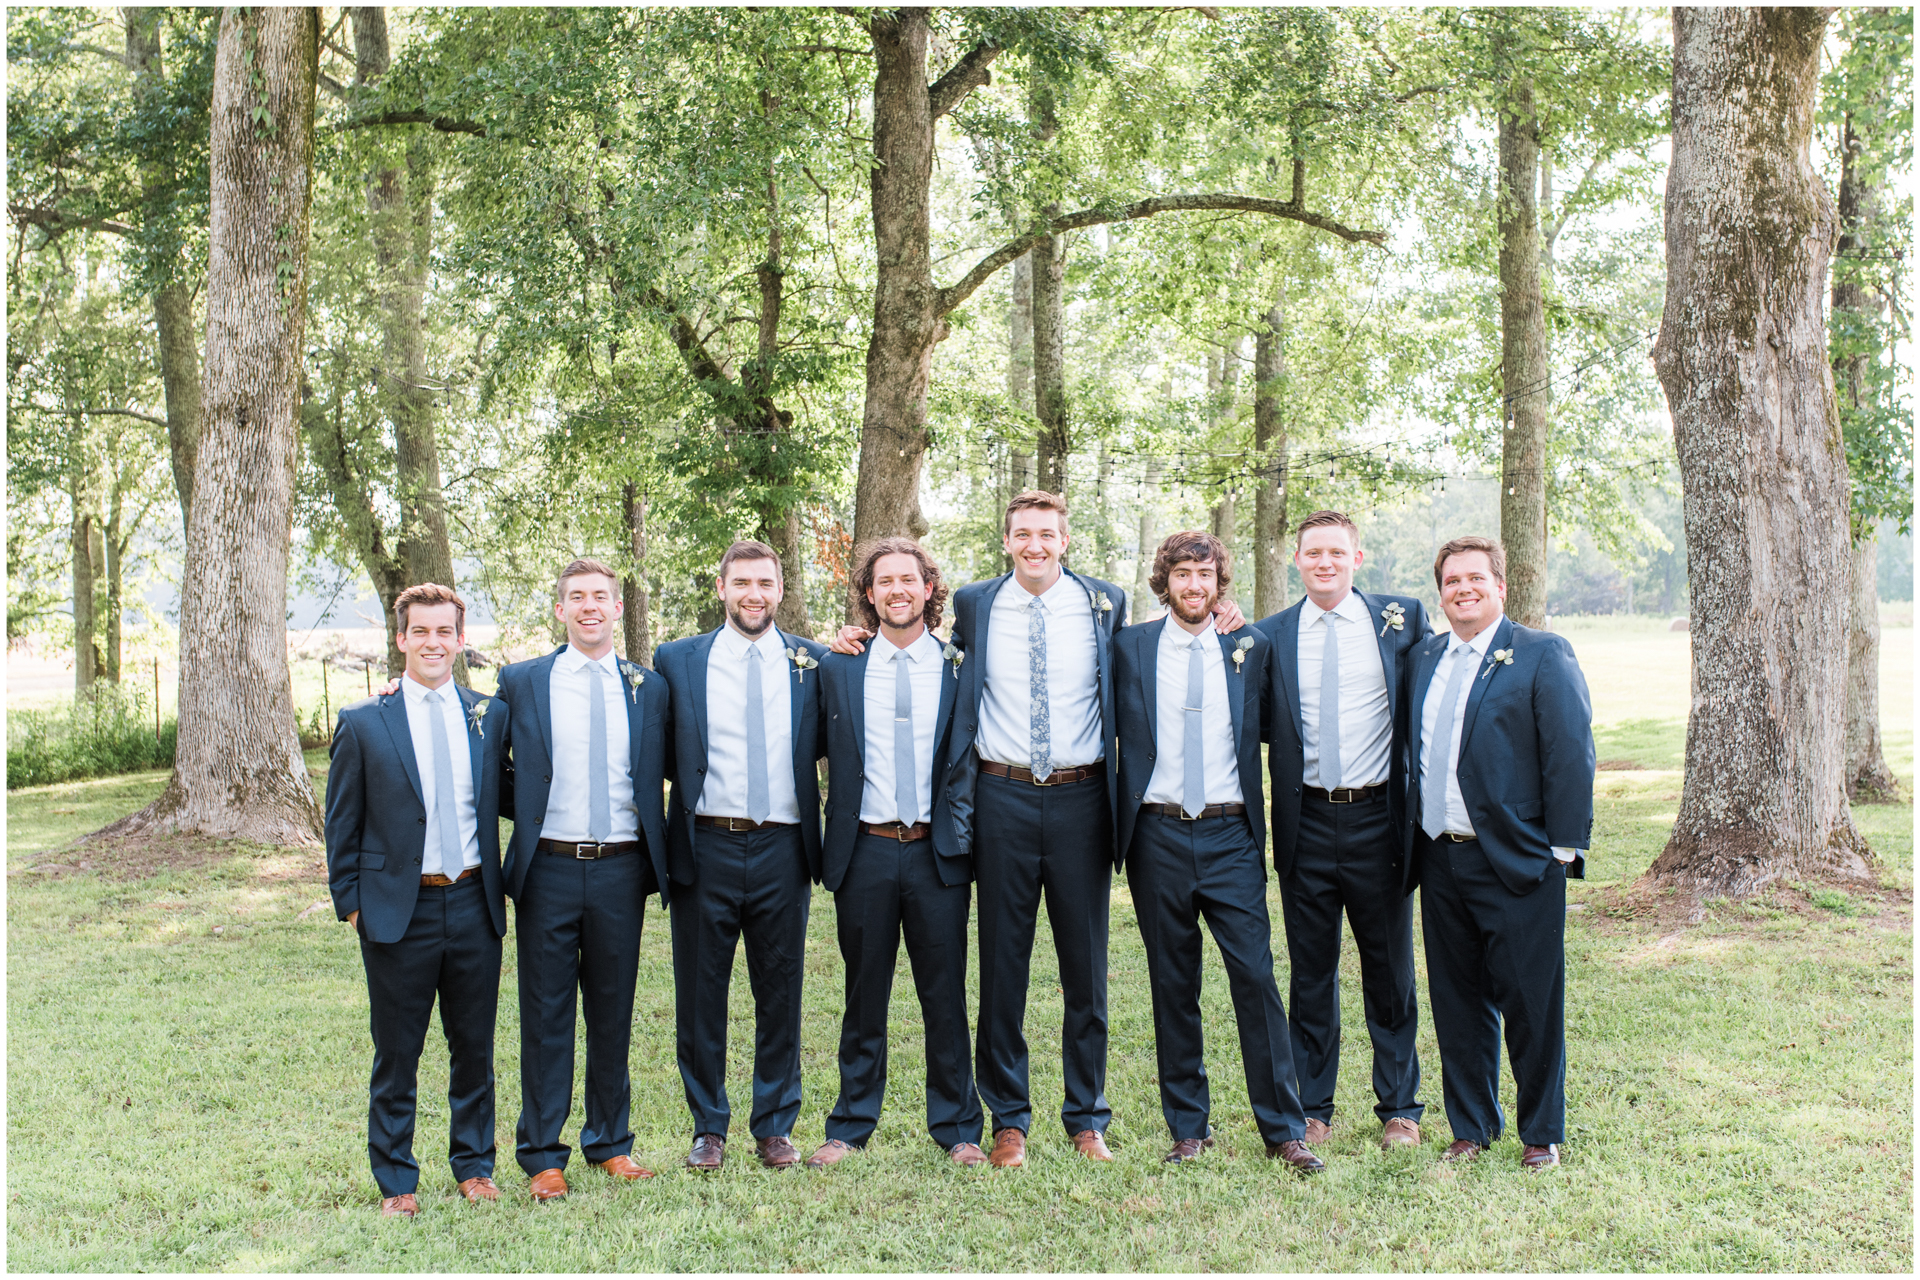 Groomsmen photo in navy suits and slate blue ties at Harvest Hollow Venue and Farm 